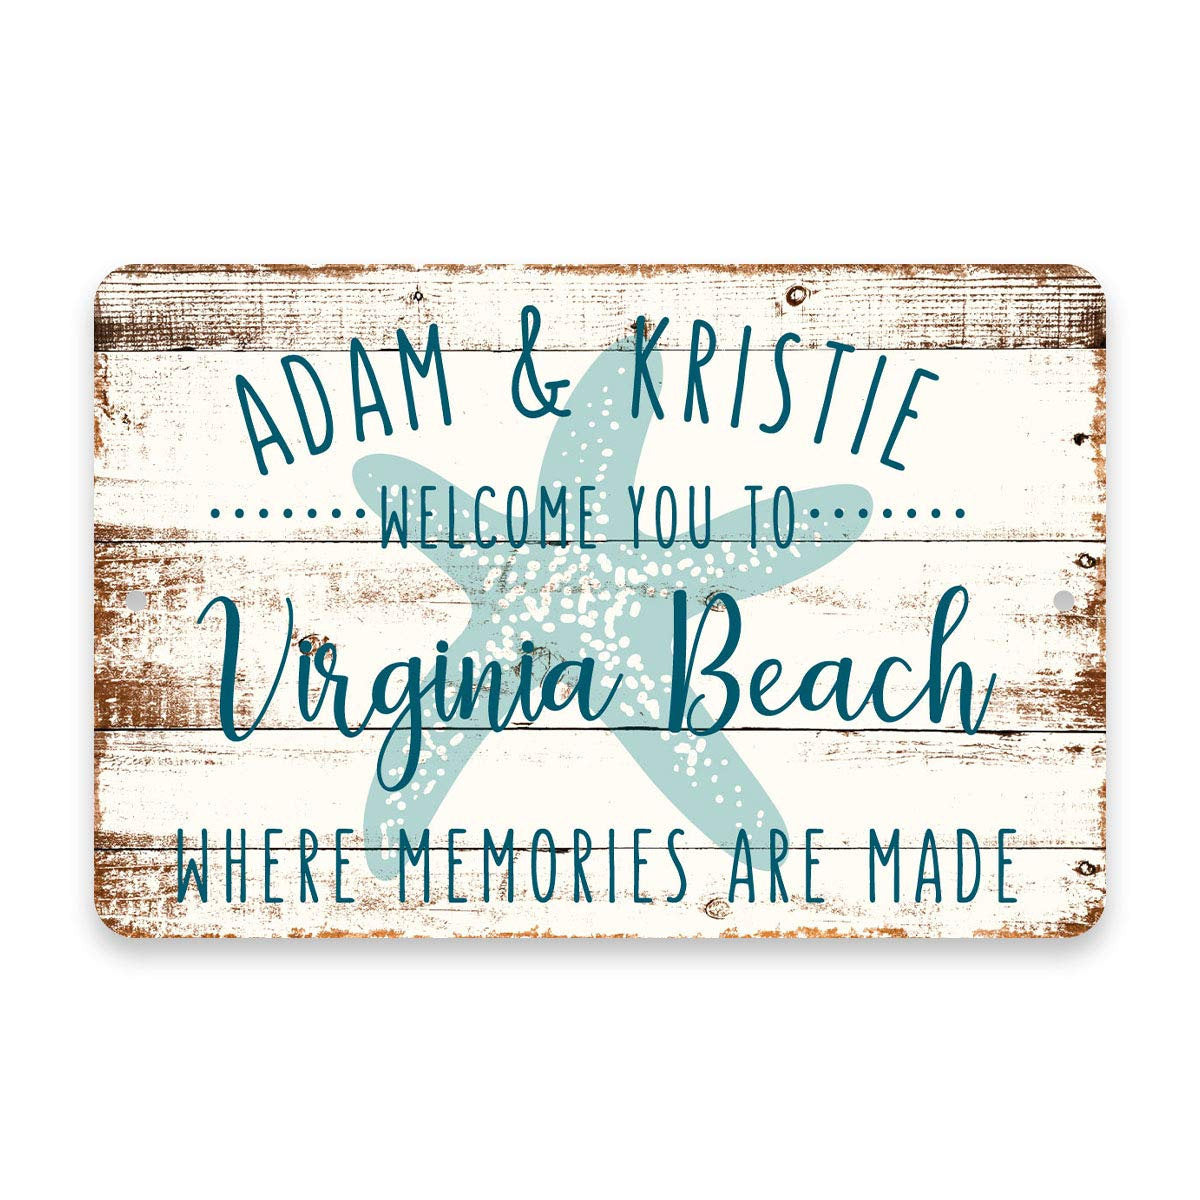 Personalized Welcome to Virginia Beach Where Memories are Made Sign - 8 X 12 Metal Sign with Wood Look